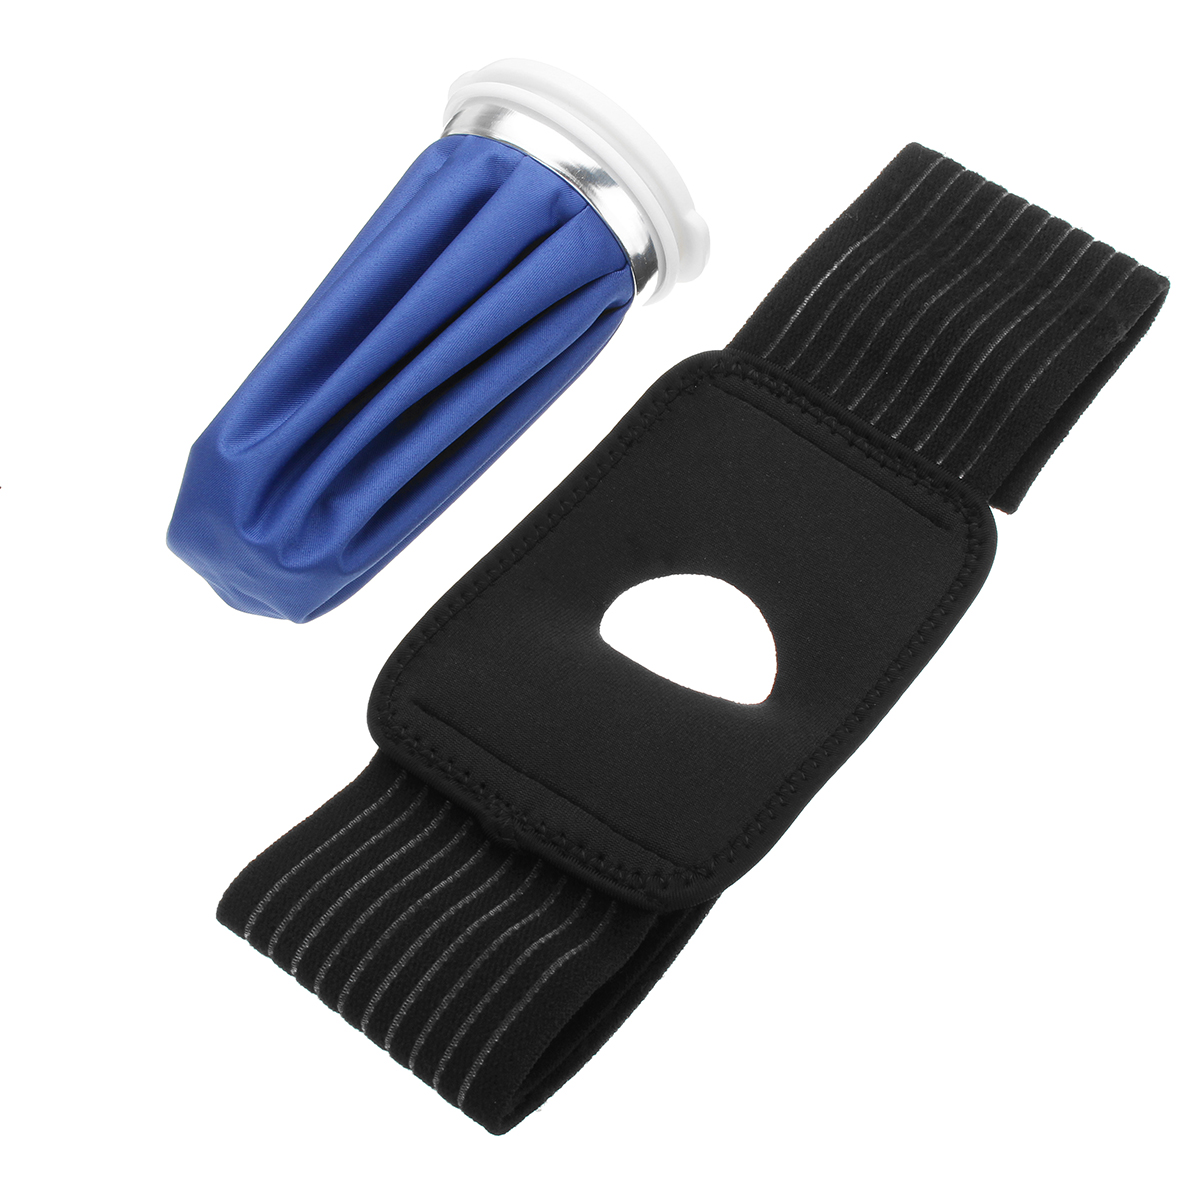 Ice-Bag-Pack-Pain-Relief-Cold-Broad-Knee-Shoulder-Injuries-Therapy-Strap-Wrap-Elastic-Tie-Belt-1551776-1